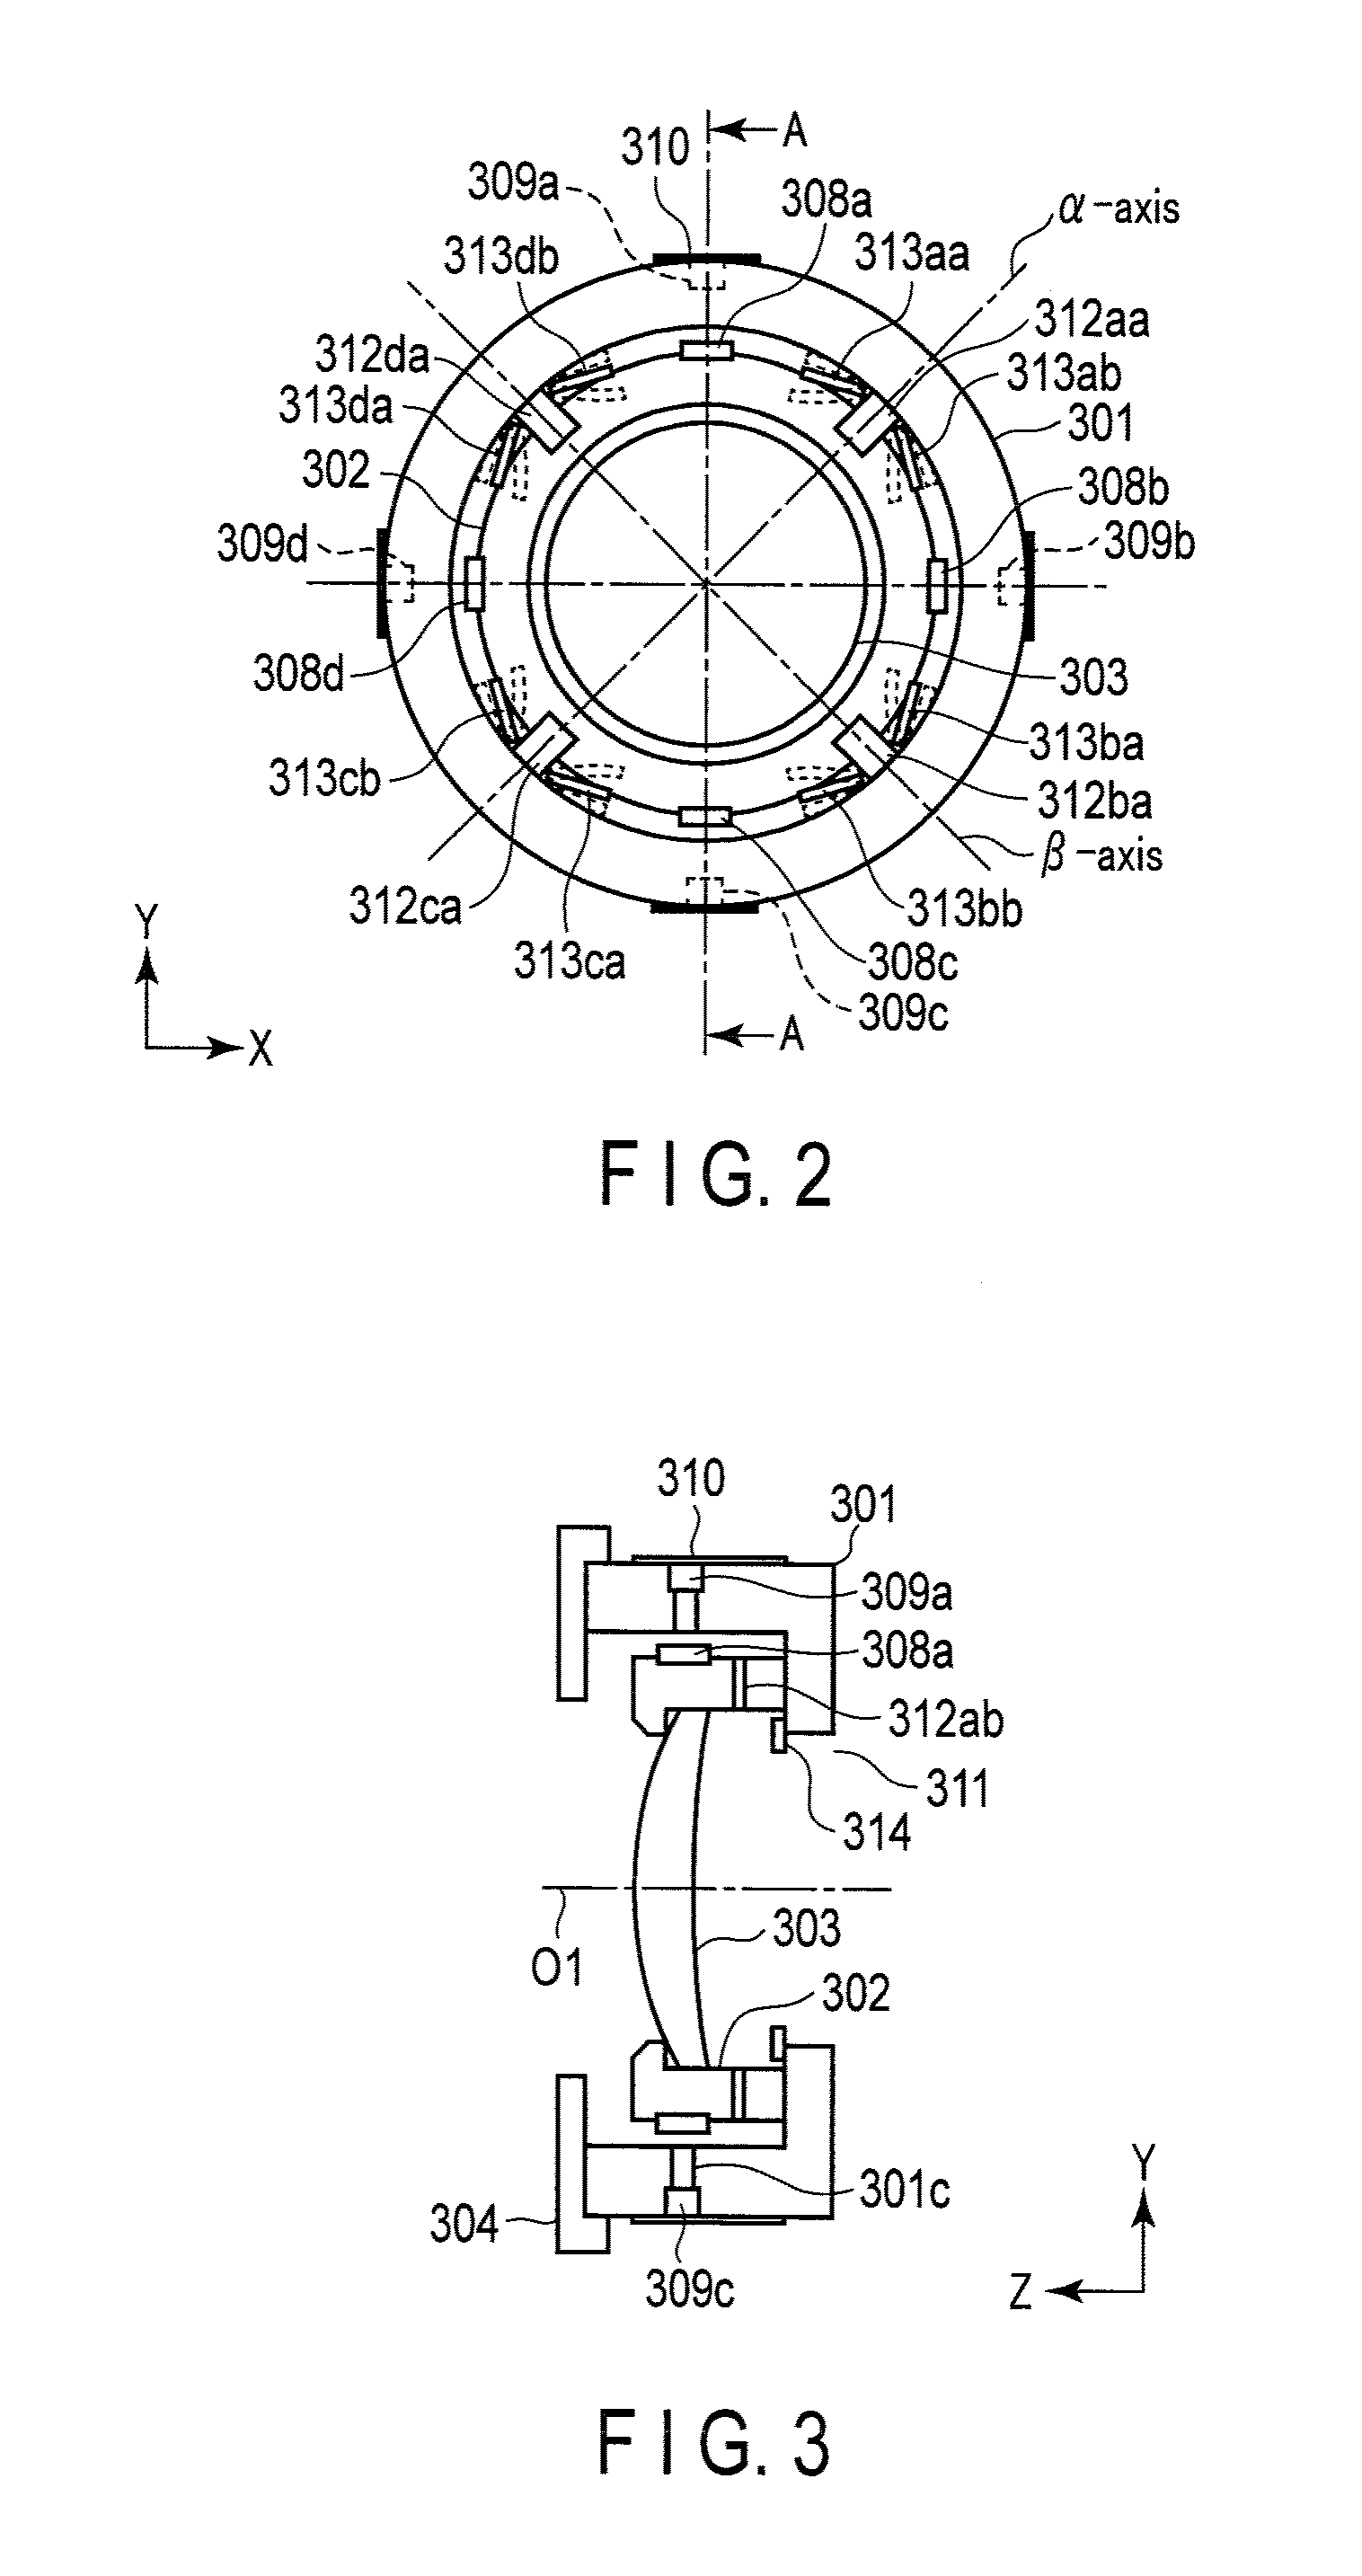 Driver and image instrument